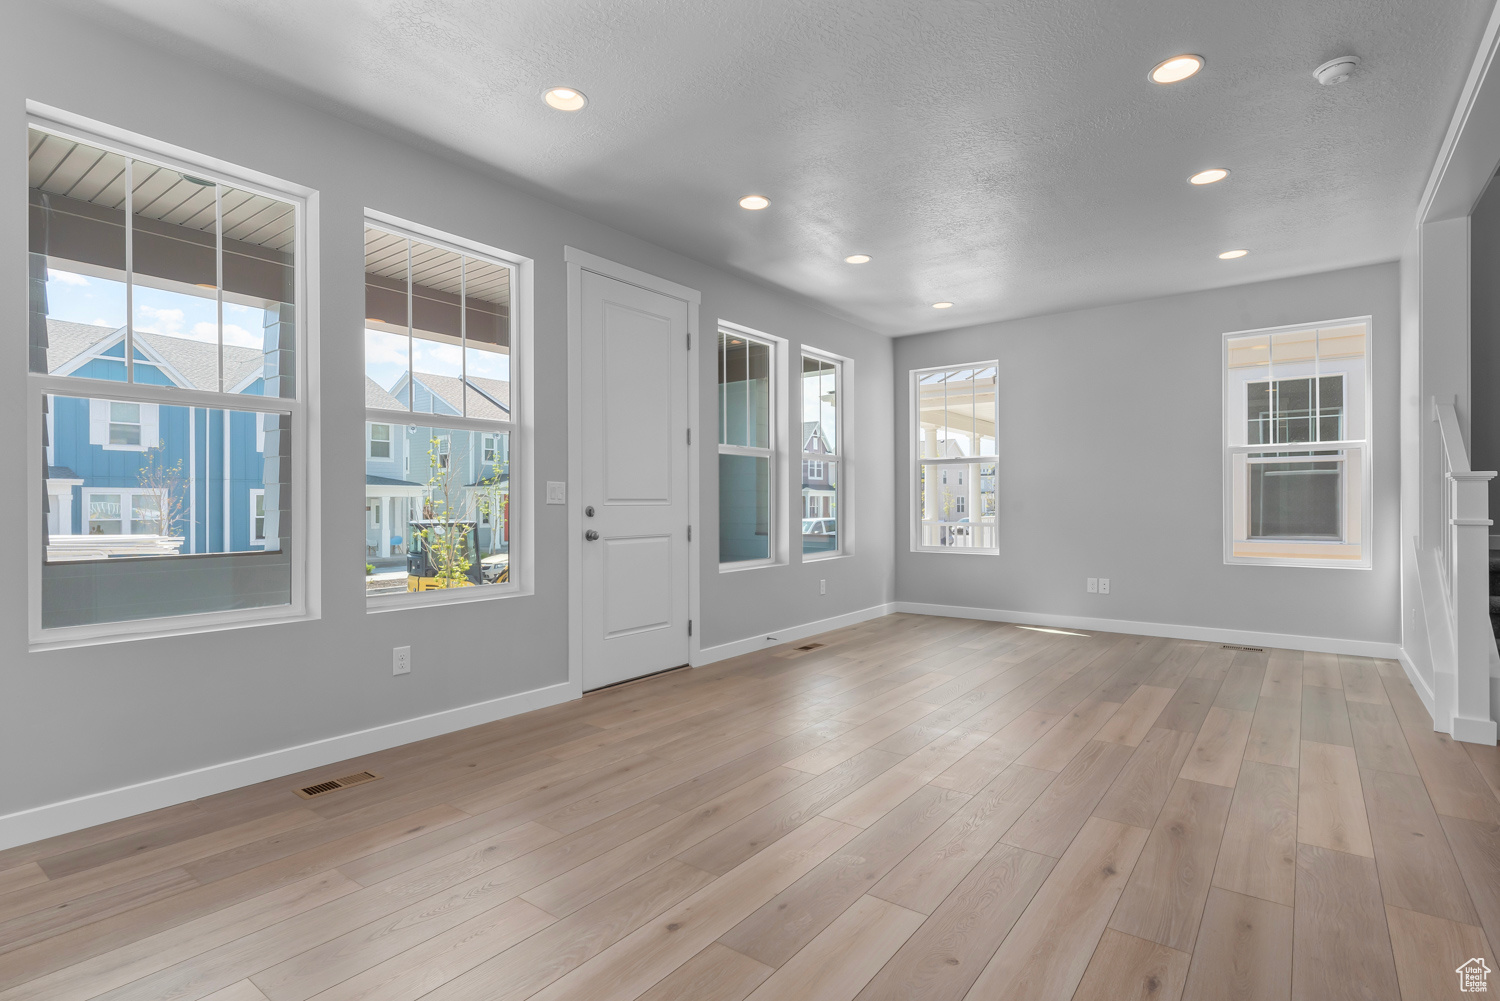 Interior space with a wealth of natural light and light hardwood / wood-style floors